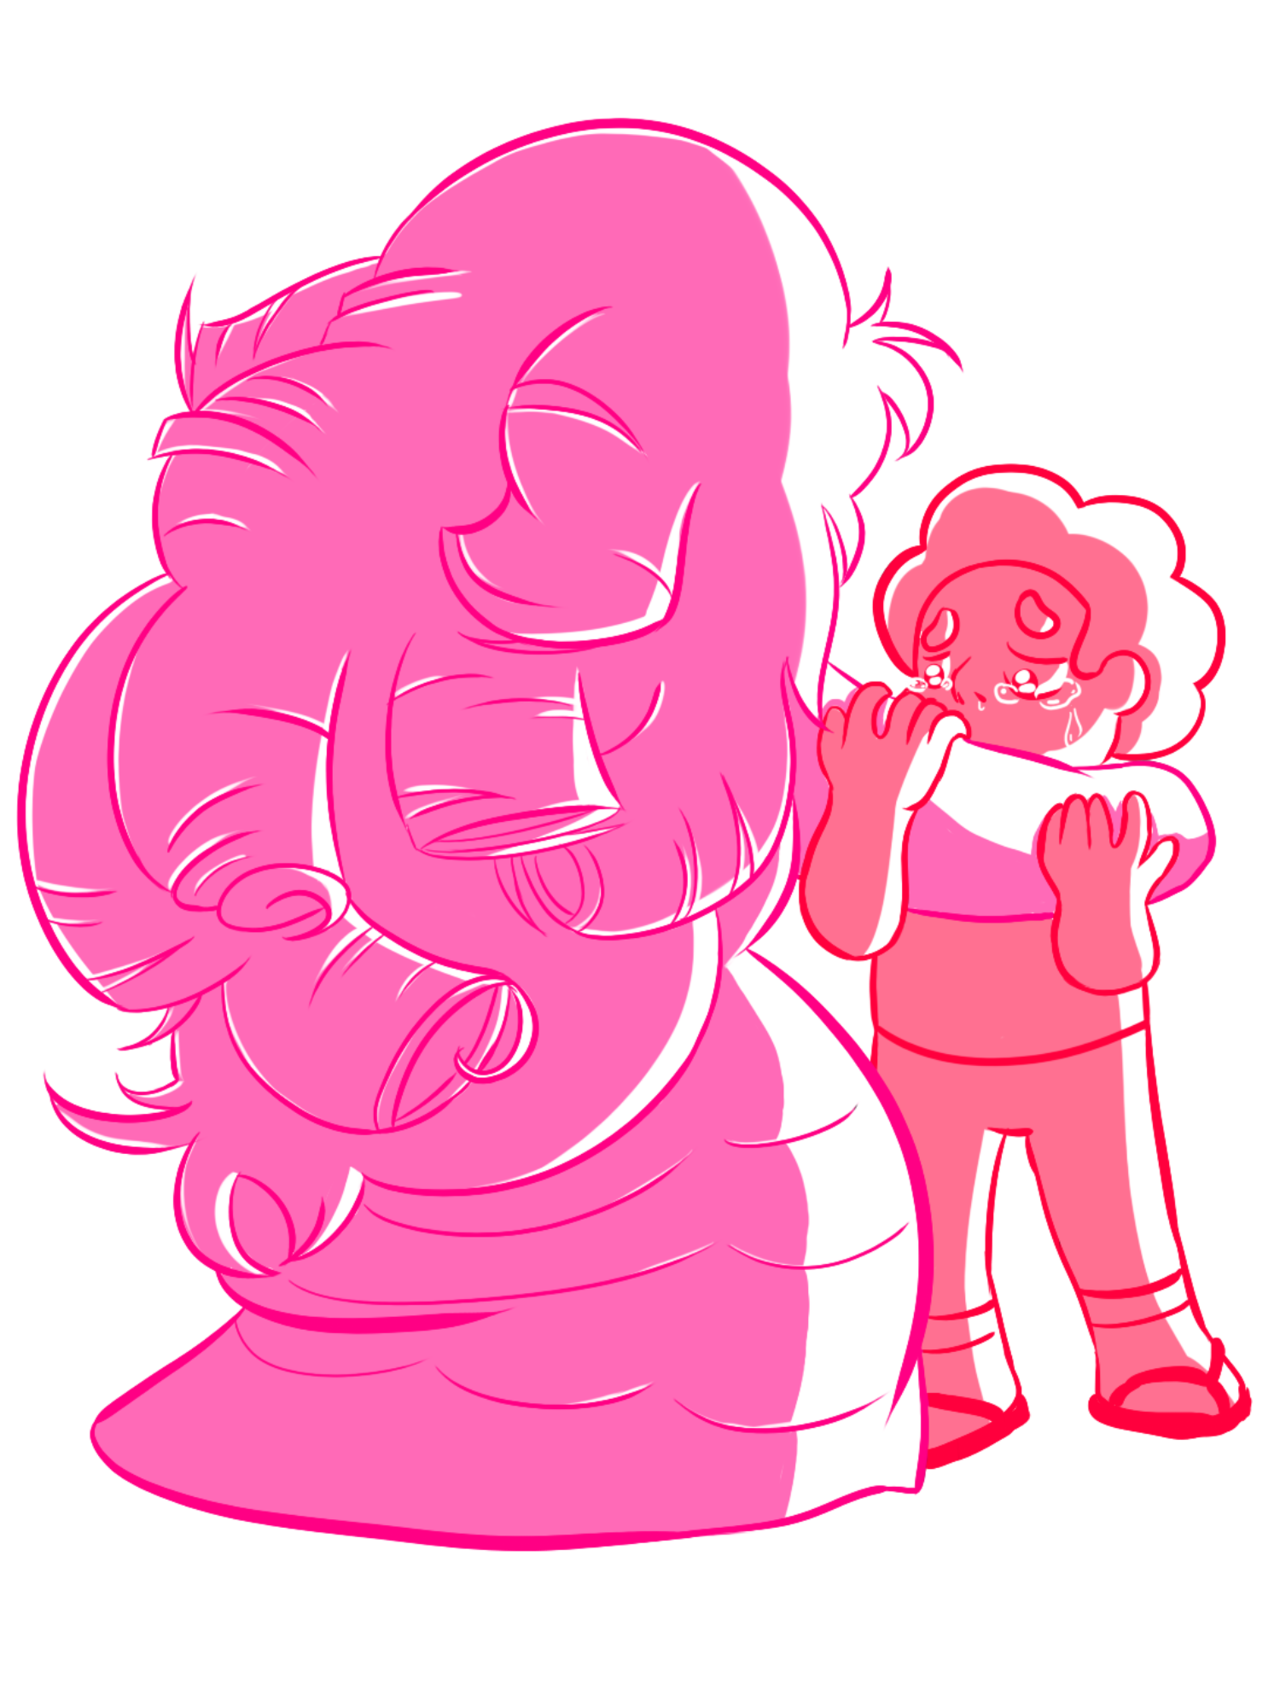 doodled some su stuff cuz why not